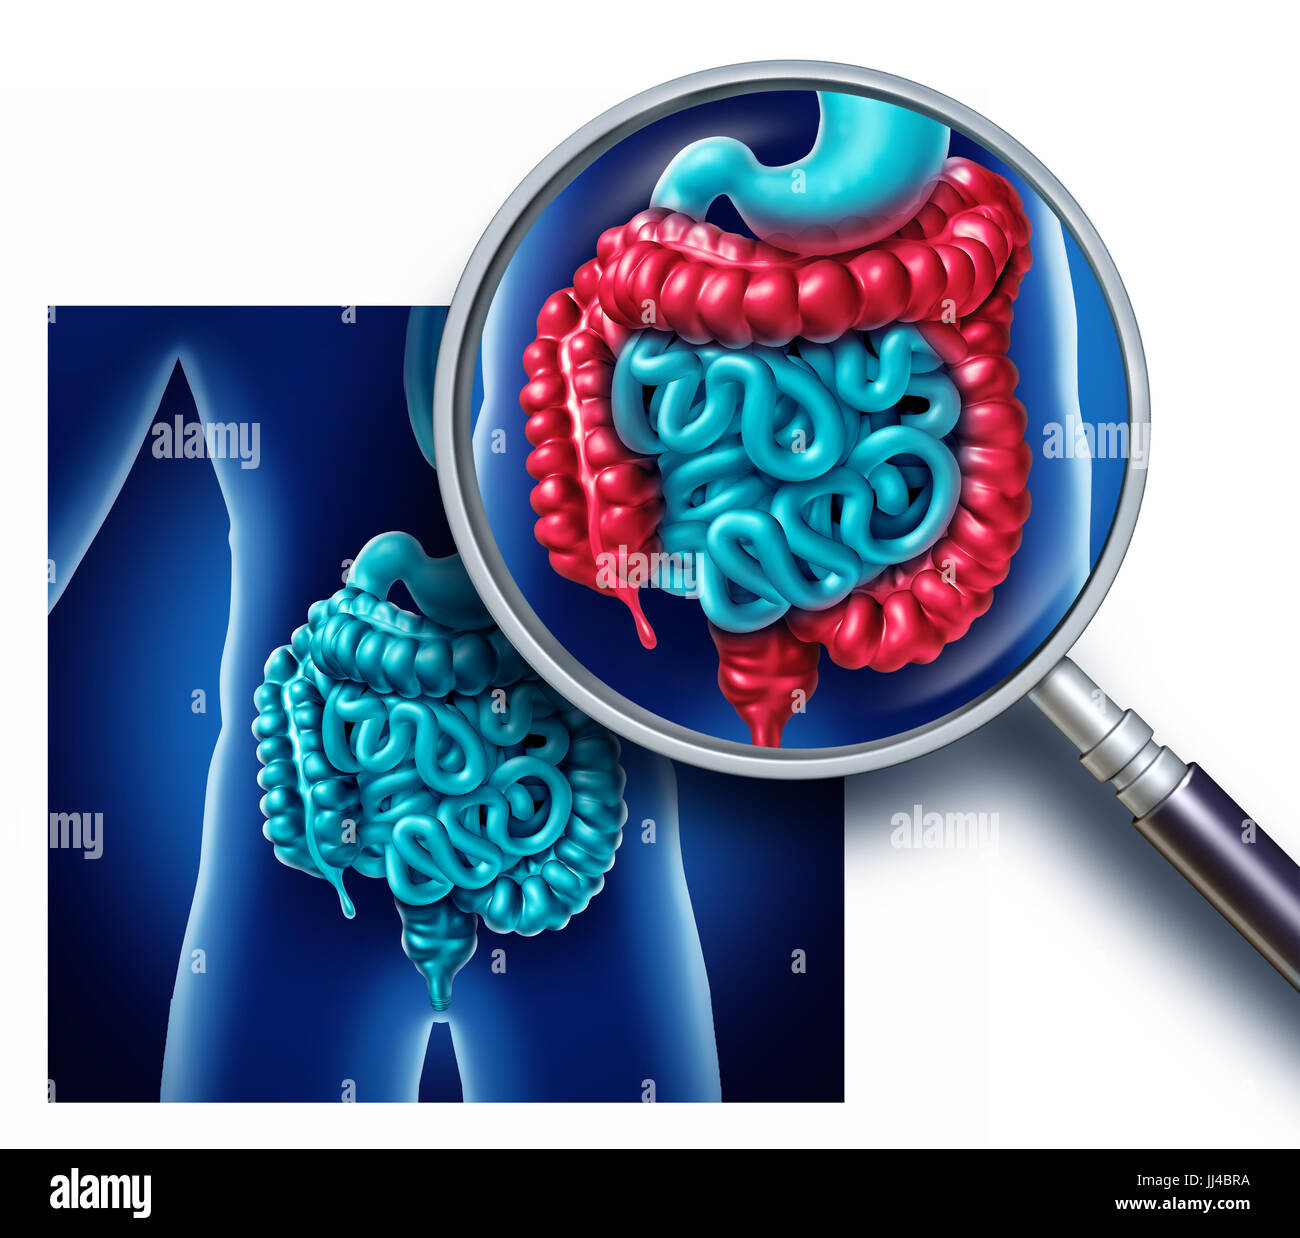 Colon and large bowel pain and intestine Illustration as a digestive system organ and digestion body part inflammation concept with rectum. Stock Photo